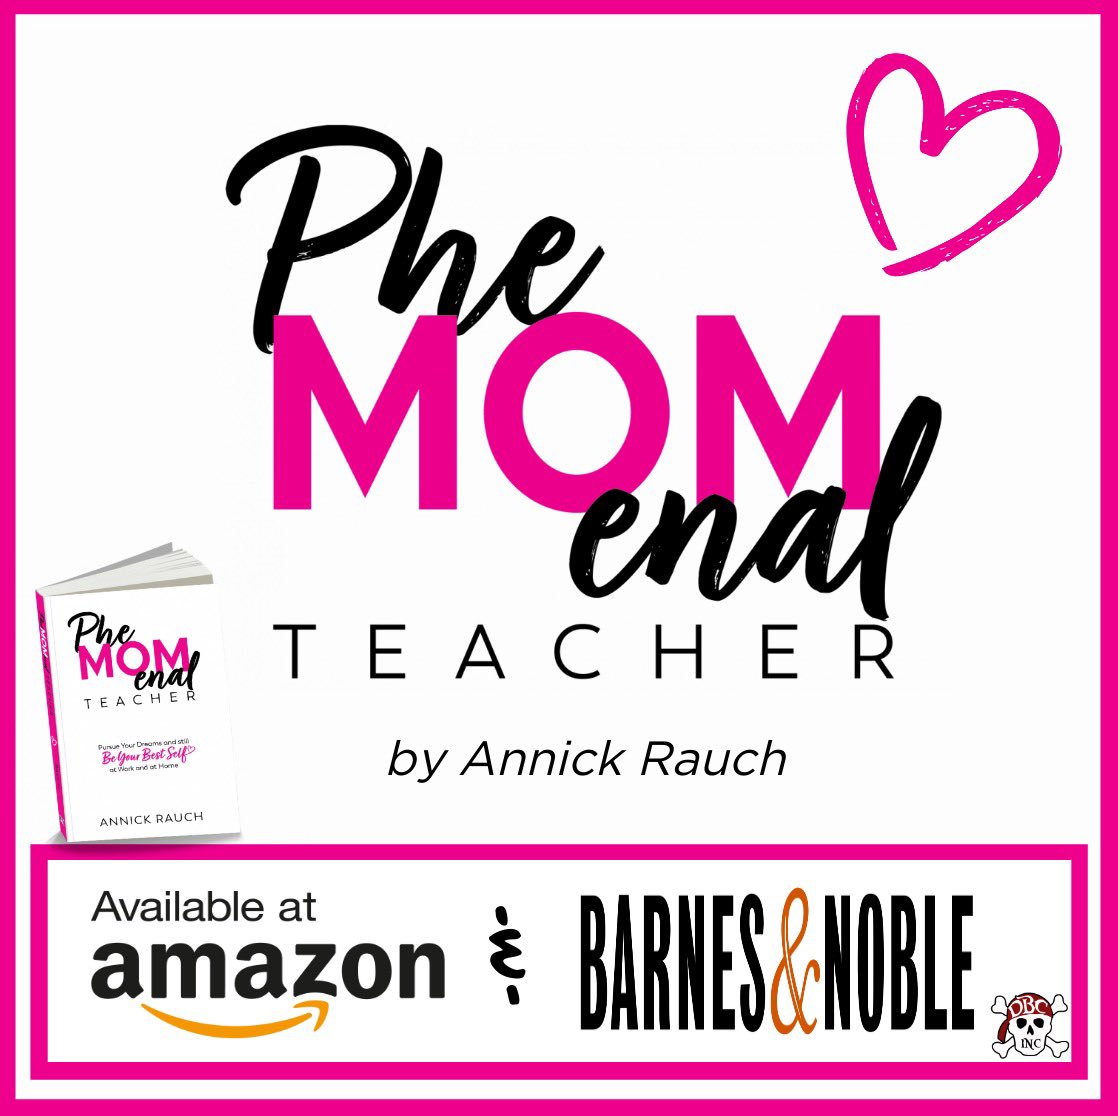 Do you know a mom who teaches? We have the PERFECT project!! #PheMOMenal Teacher by @AnnickRauch!! Pursue your dreams and still be your best self at work and at home!! amazon.com/PheMOMenal-Tea… #dbcincbooks #InternationalWomensDay #momswhoteach #tlap